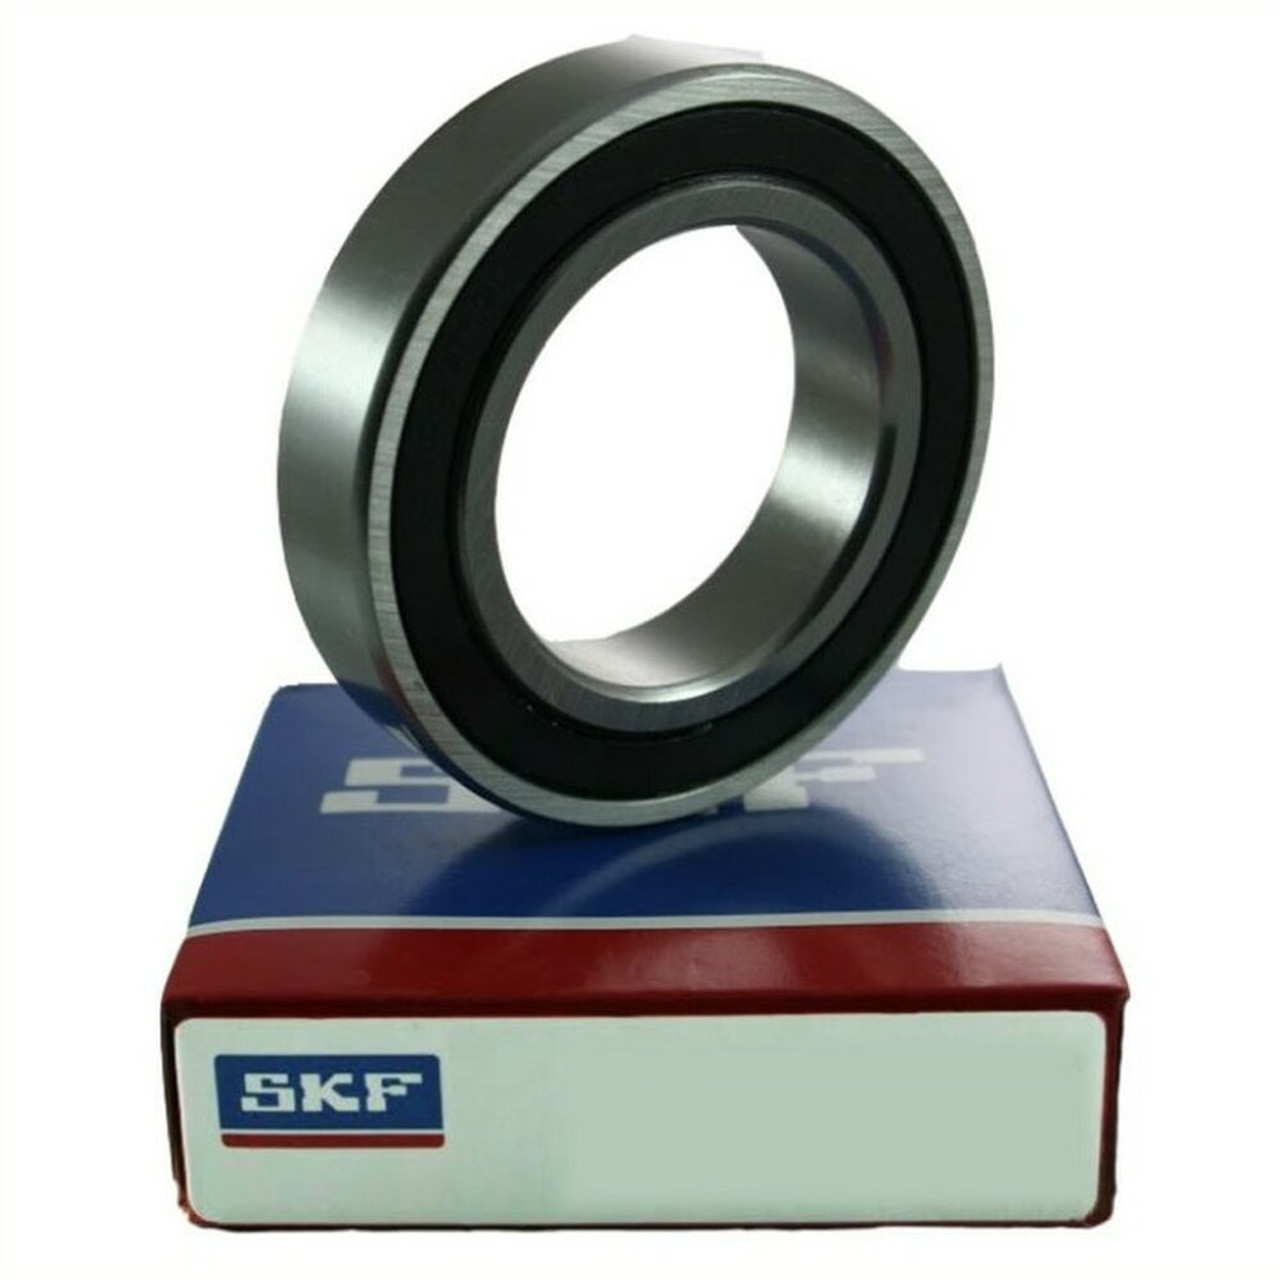 ROULEMENT SKF 6004 EXT: 42MM INT: 20MM EP: 12MM CAMINO PX